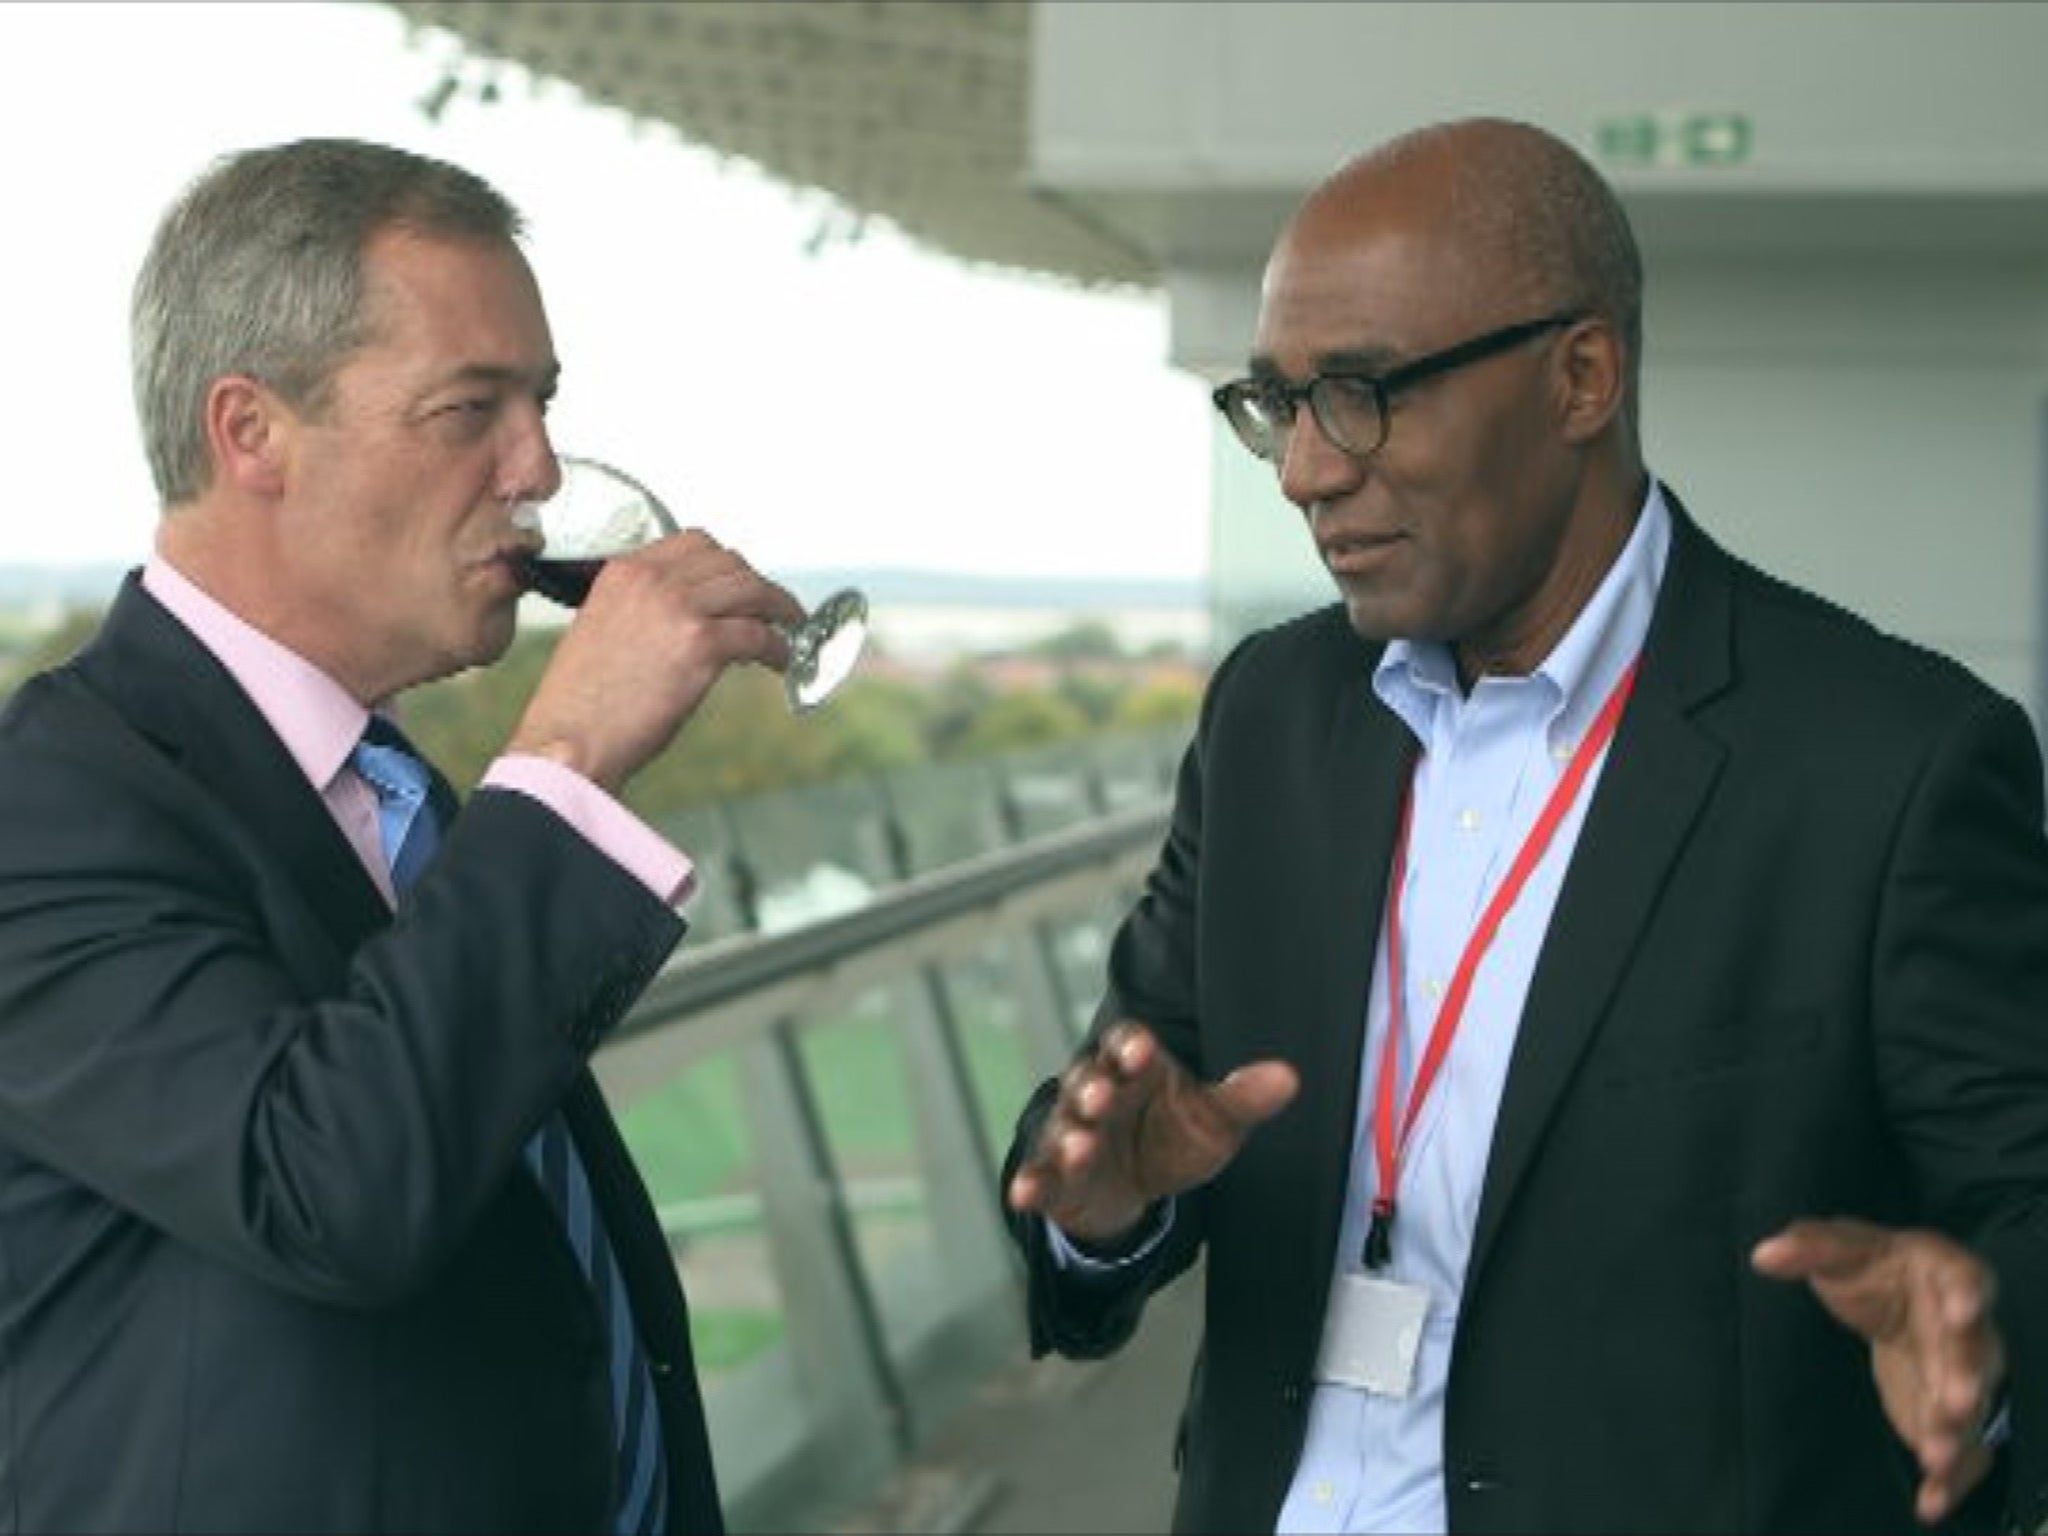 Glass struggle: Trevor Phillips talks to Nigel Farage in his Channel 4 documentary, ‘Things We Won’t Say About Race That Are True’